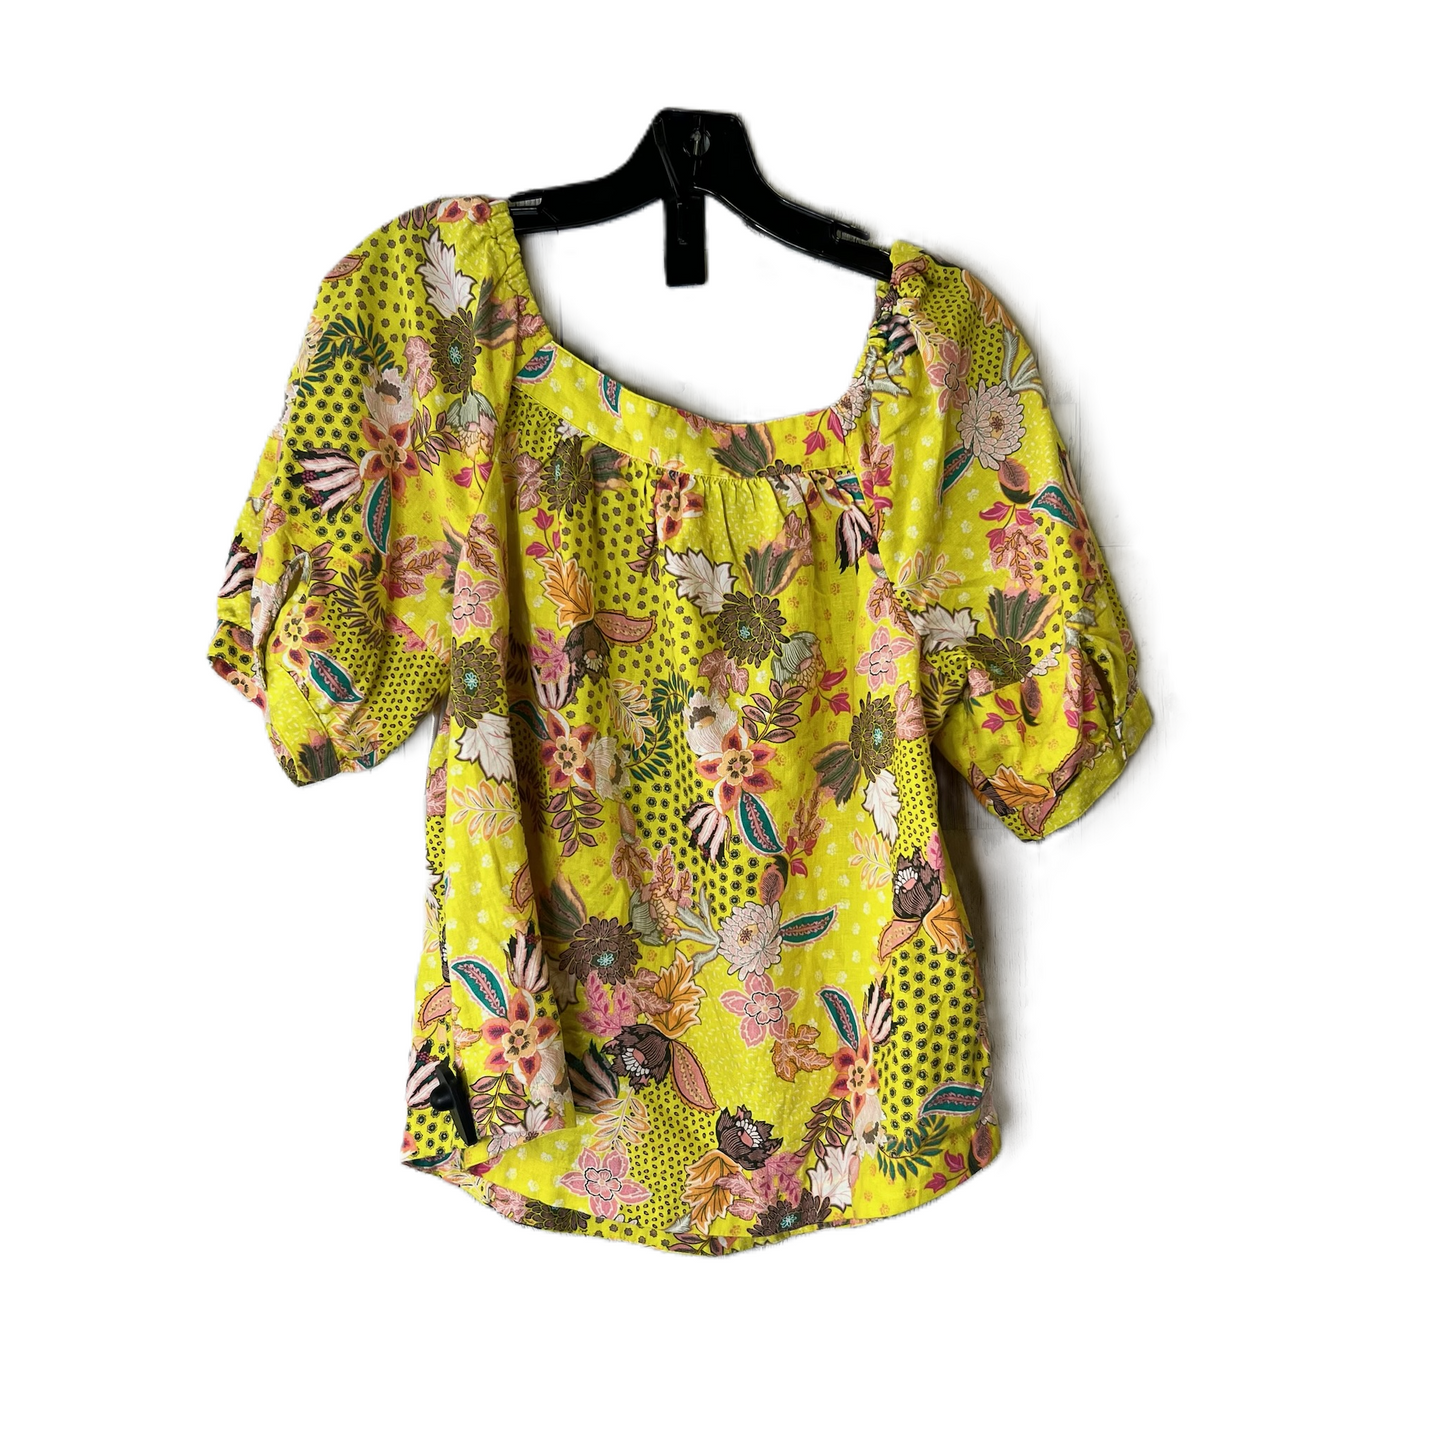 Yellow Top Short Sleeve By Loft, Size: M